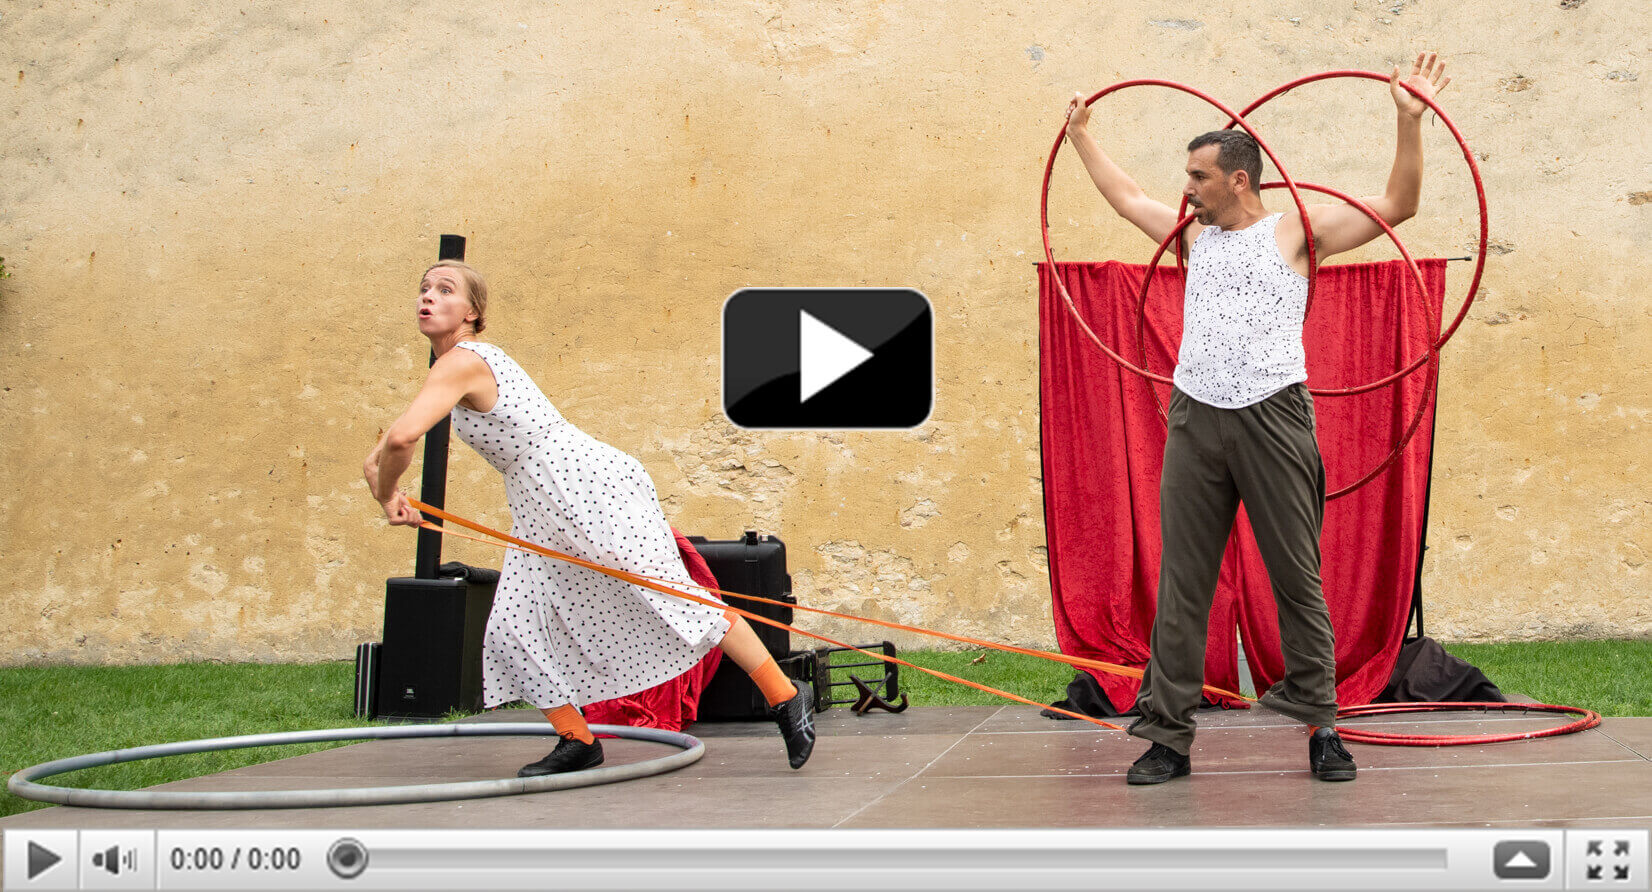 Woman in polka dot dress, man in white shirt forming a heart with two hula hoops, street arts and circus performance, beige wall in the background.